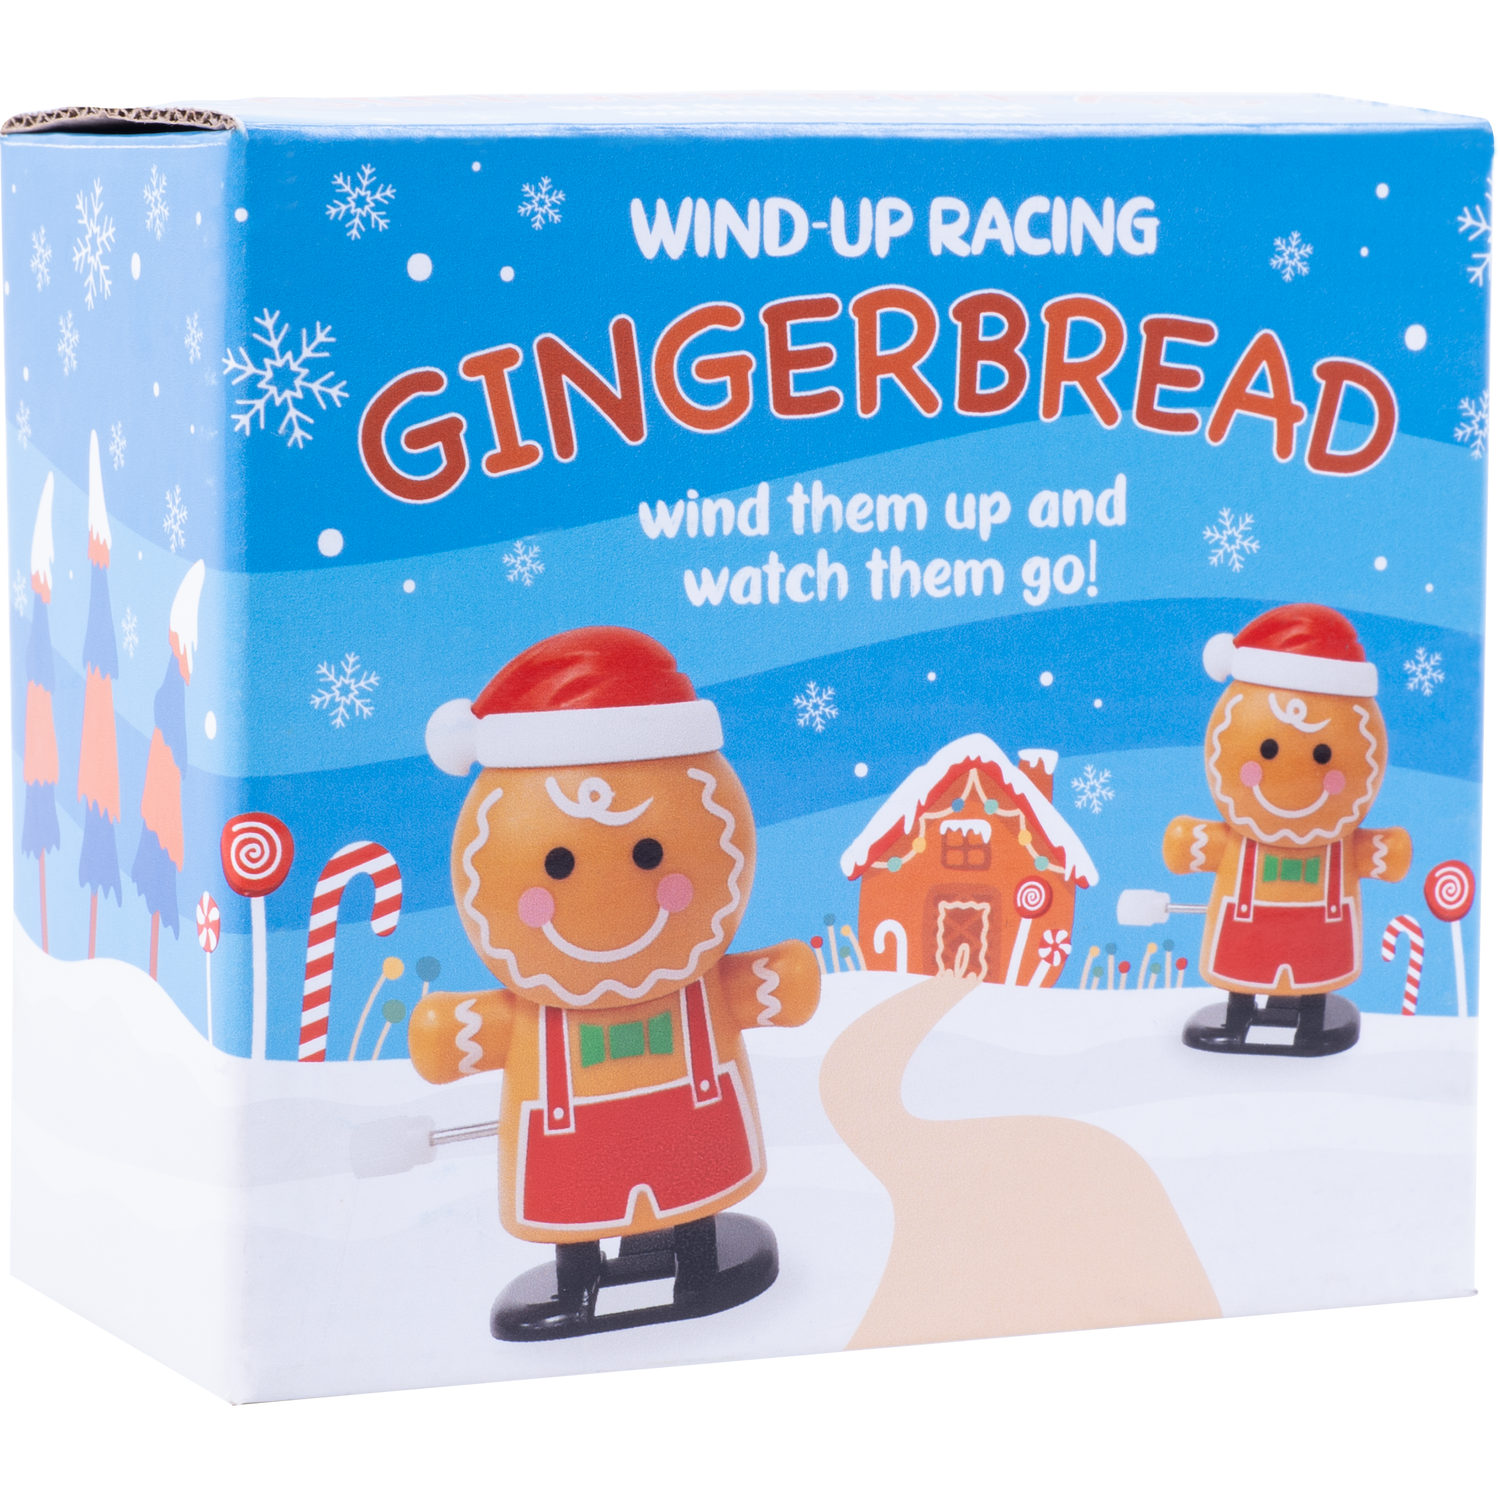 Wind-Up Racing Gingerbread Toy 2 Pack Image 2